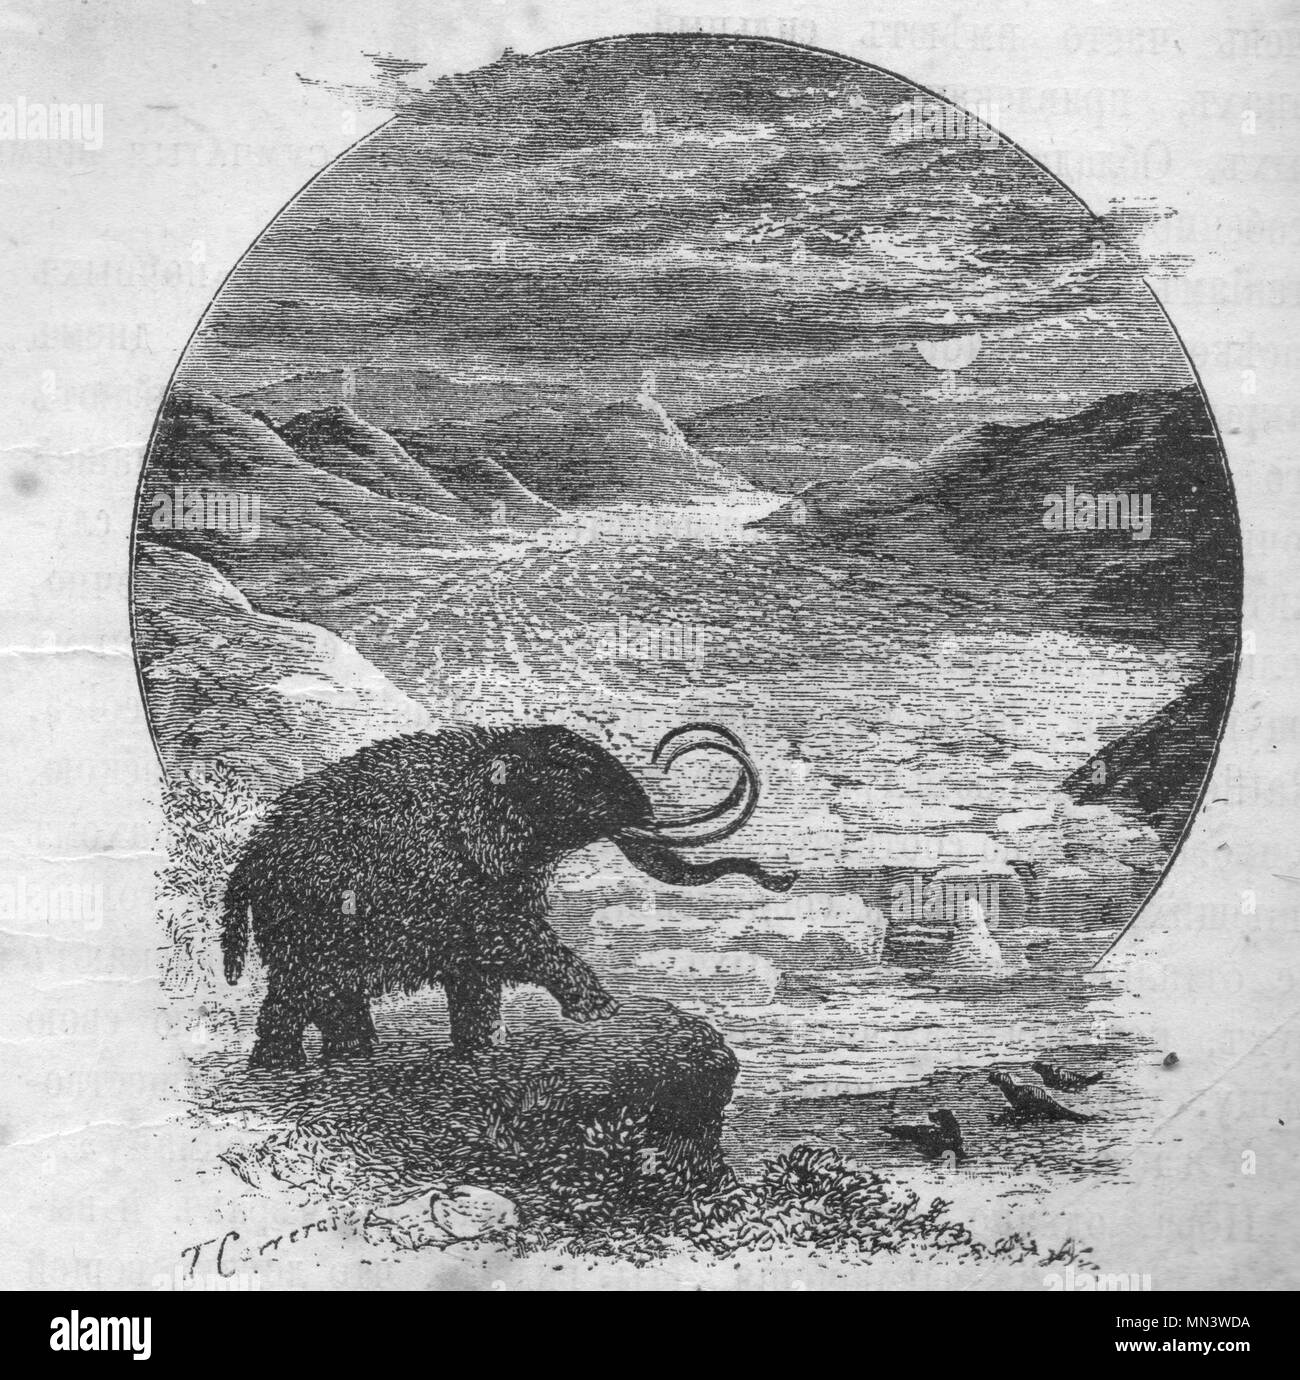 Mammoth. Vintage engraved illustration. Published in magazine in 1900. Stock Photo